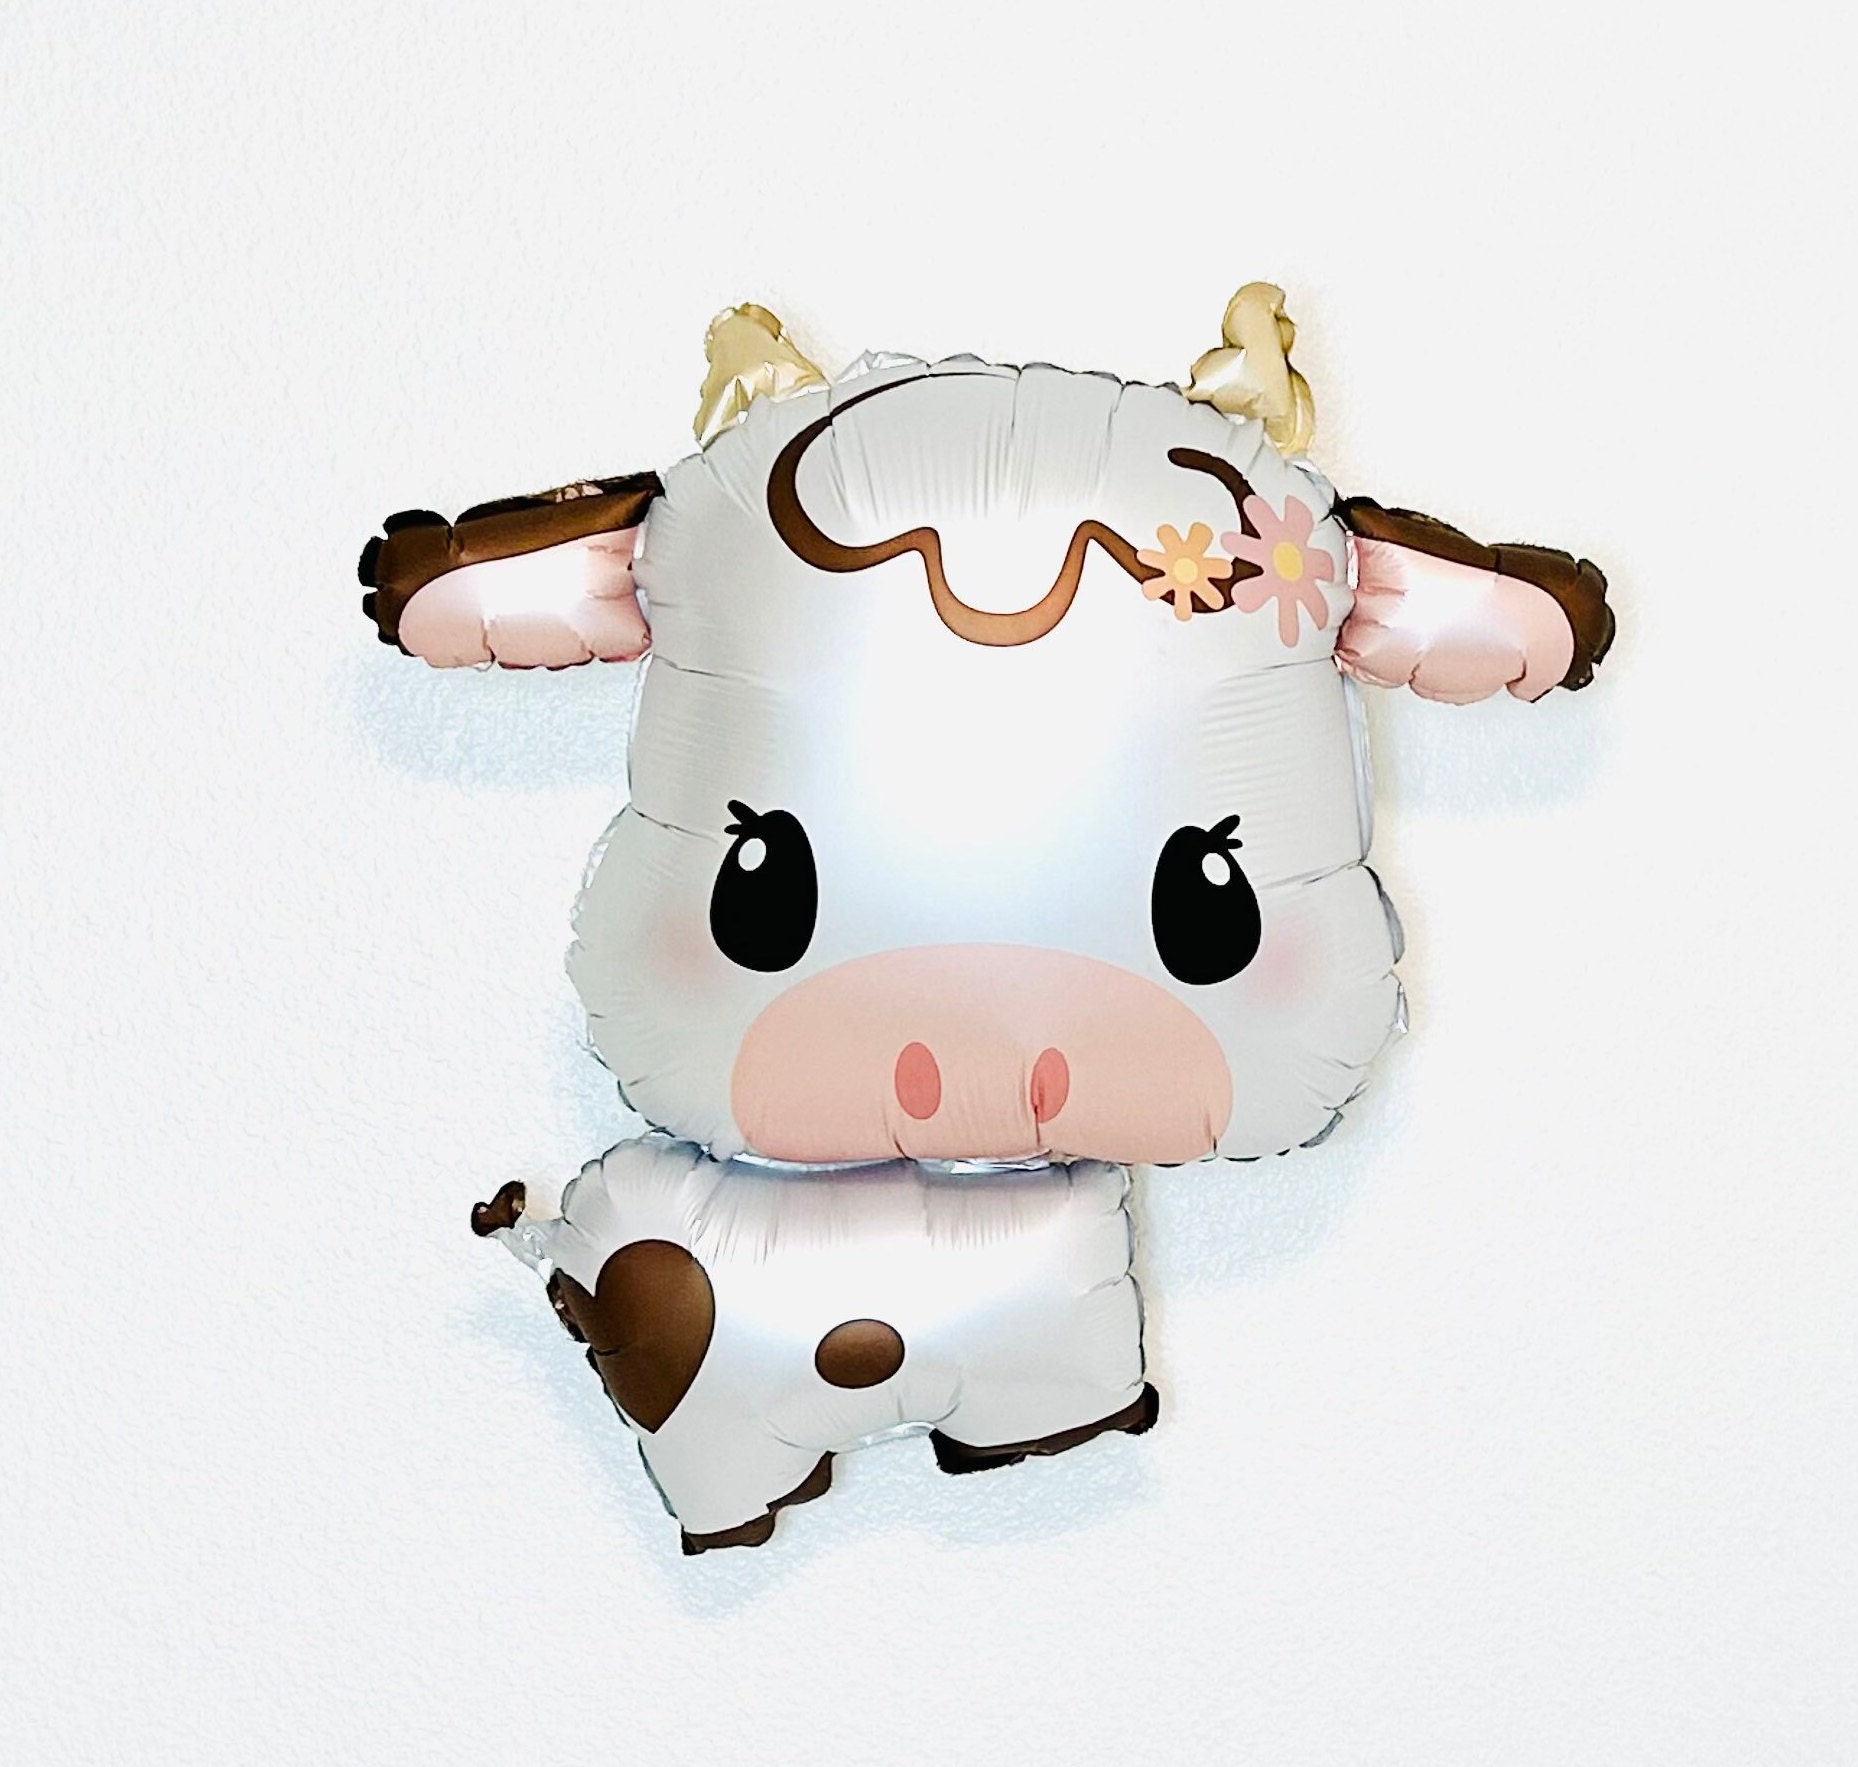 Cow 2nd Birthday Decorations, Moo Moo I'm Two Party Decorations for Boys  Girls, Farm Animals Theme Black and White Balloon Garland Kit with Moo Moo  Im Two Banner, Cow Foil Balloons 